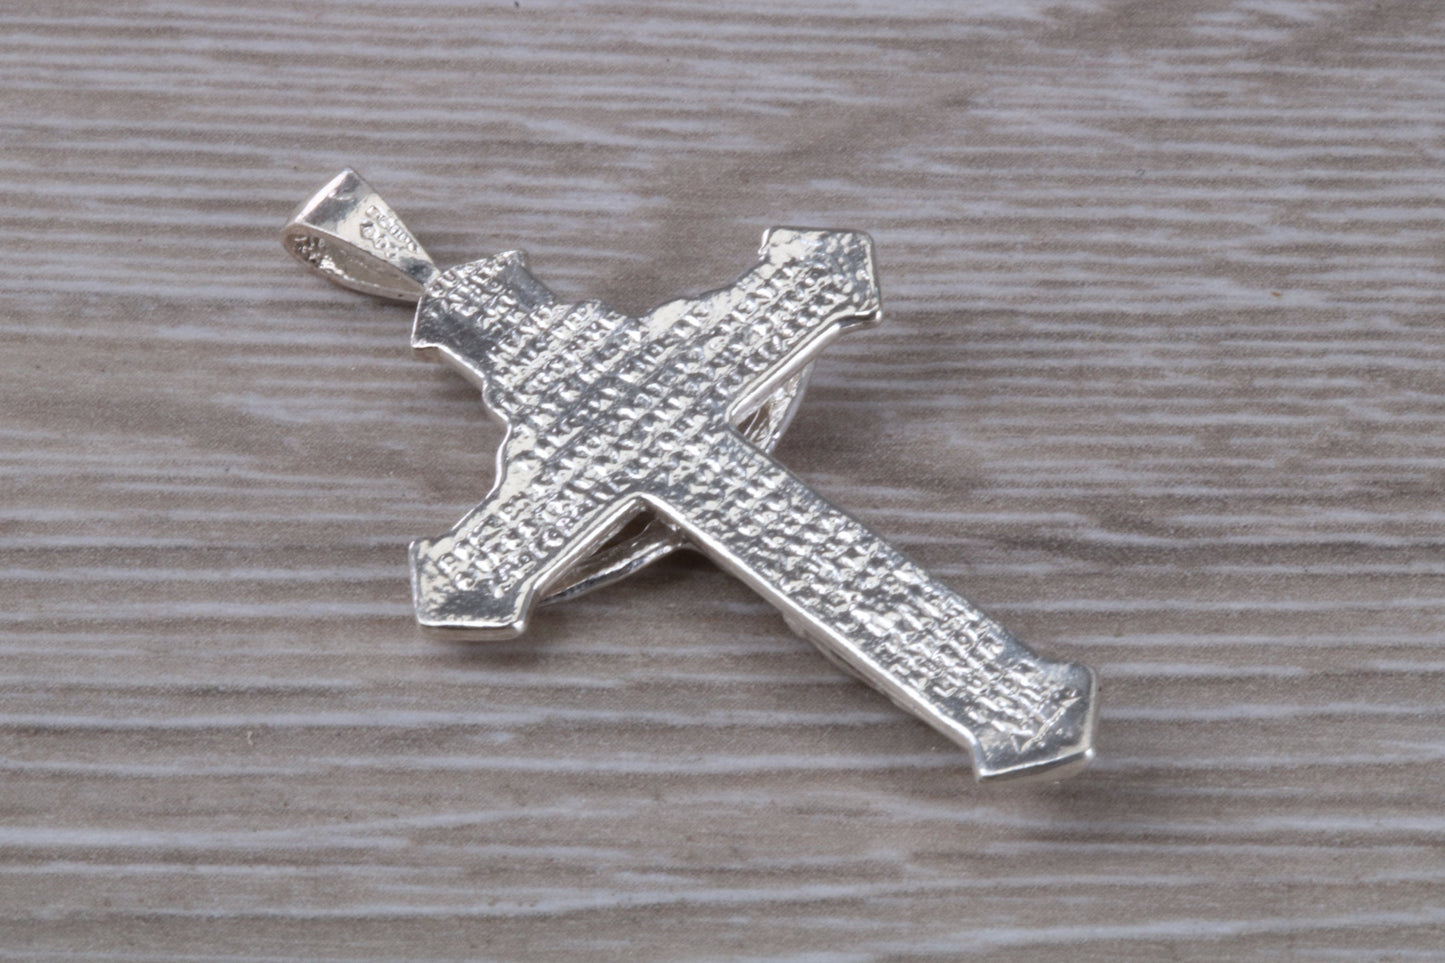 Sterling Silver Ornate Crucifix Necklace